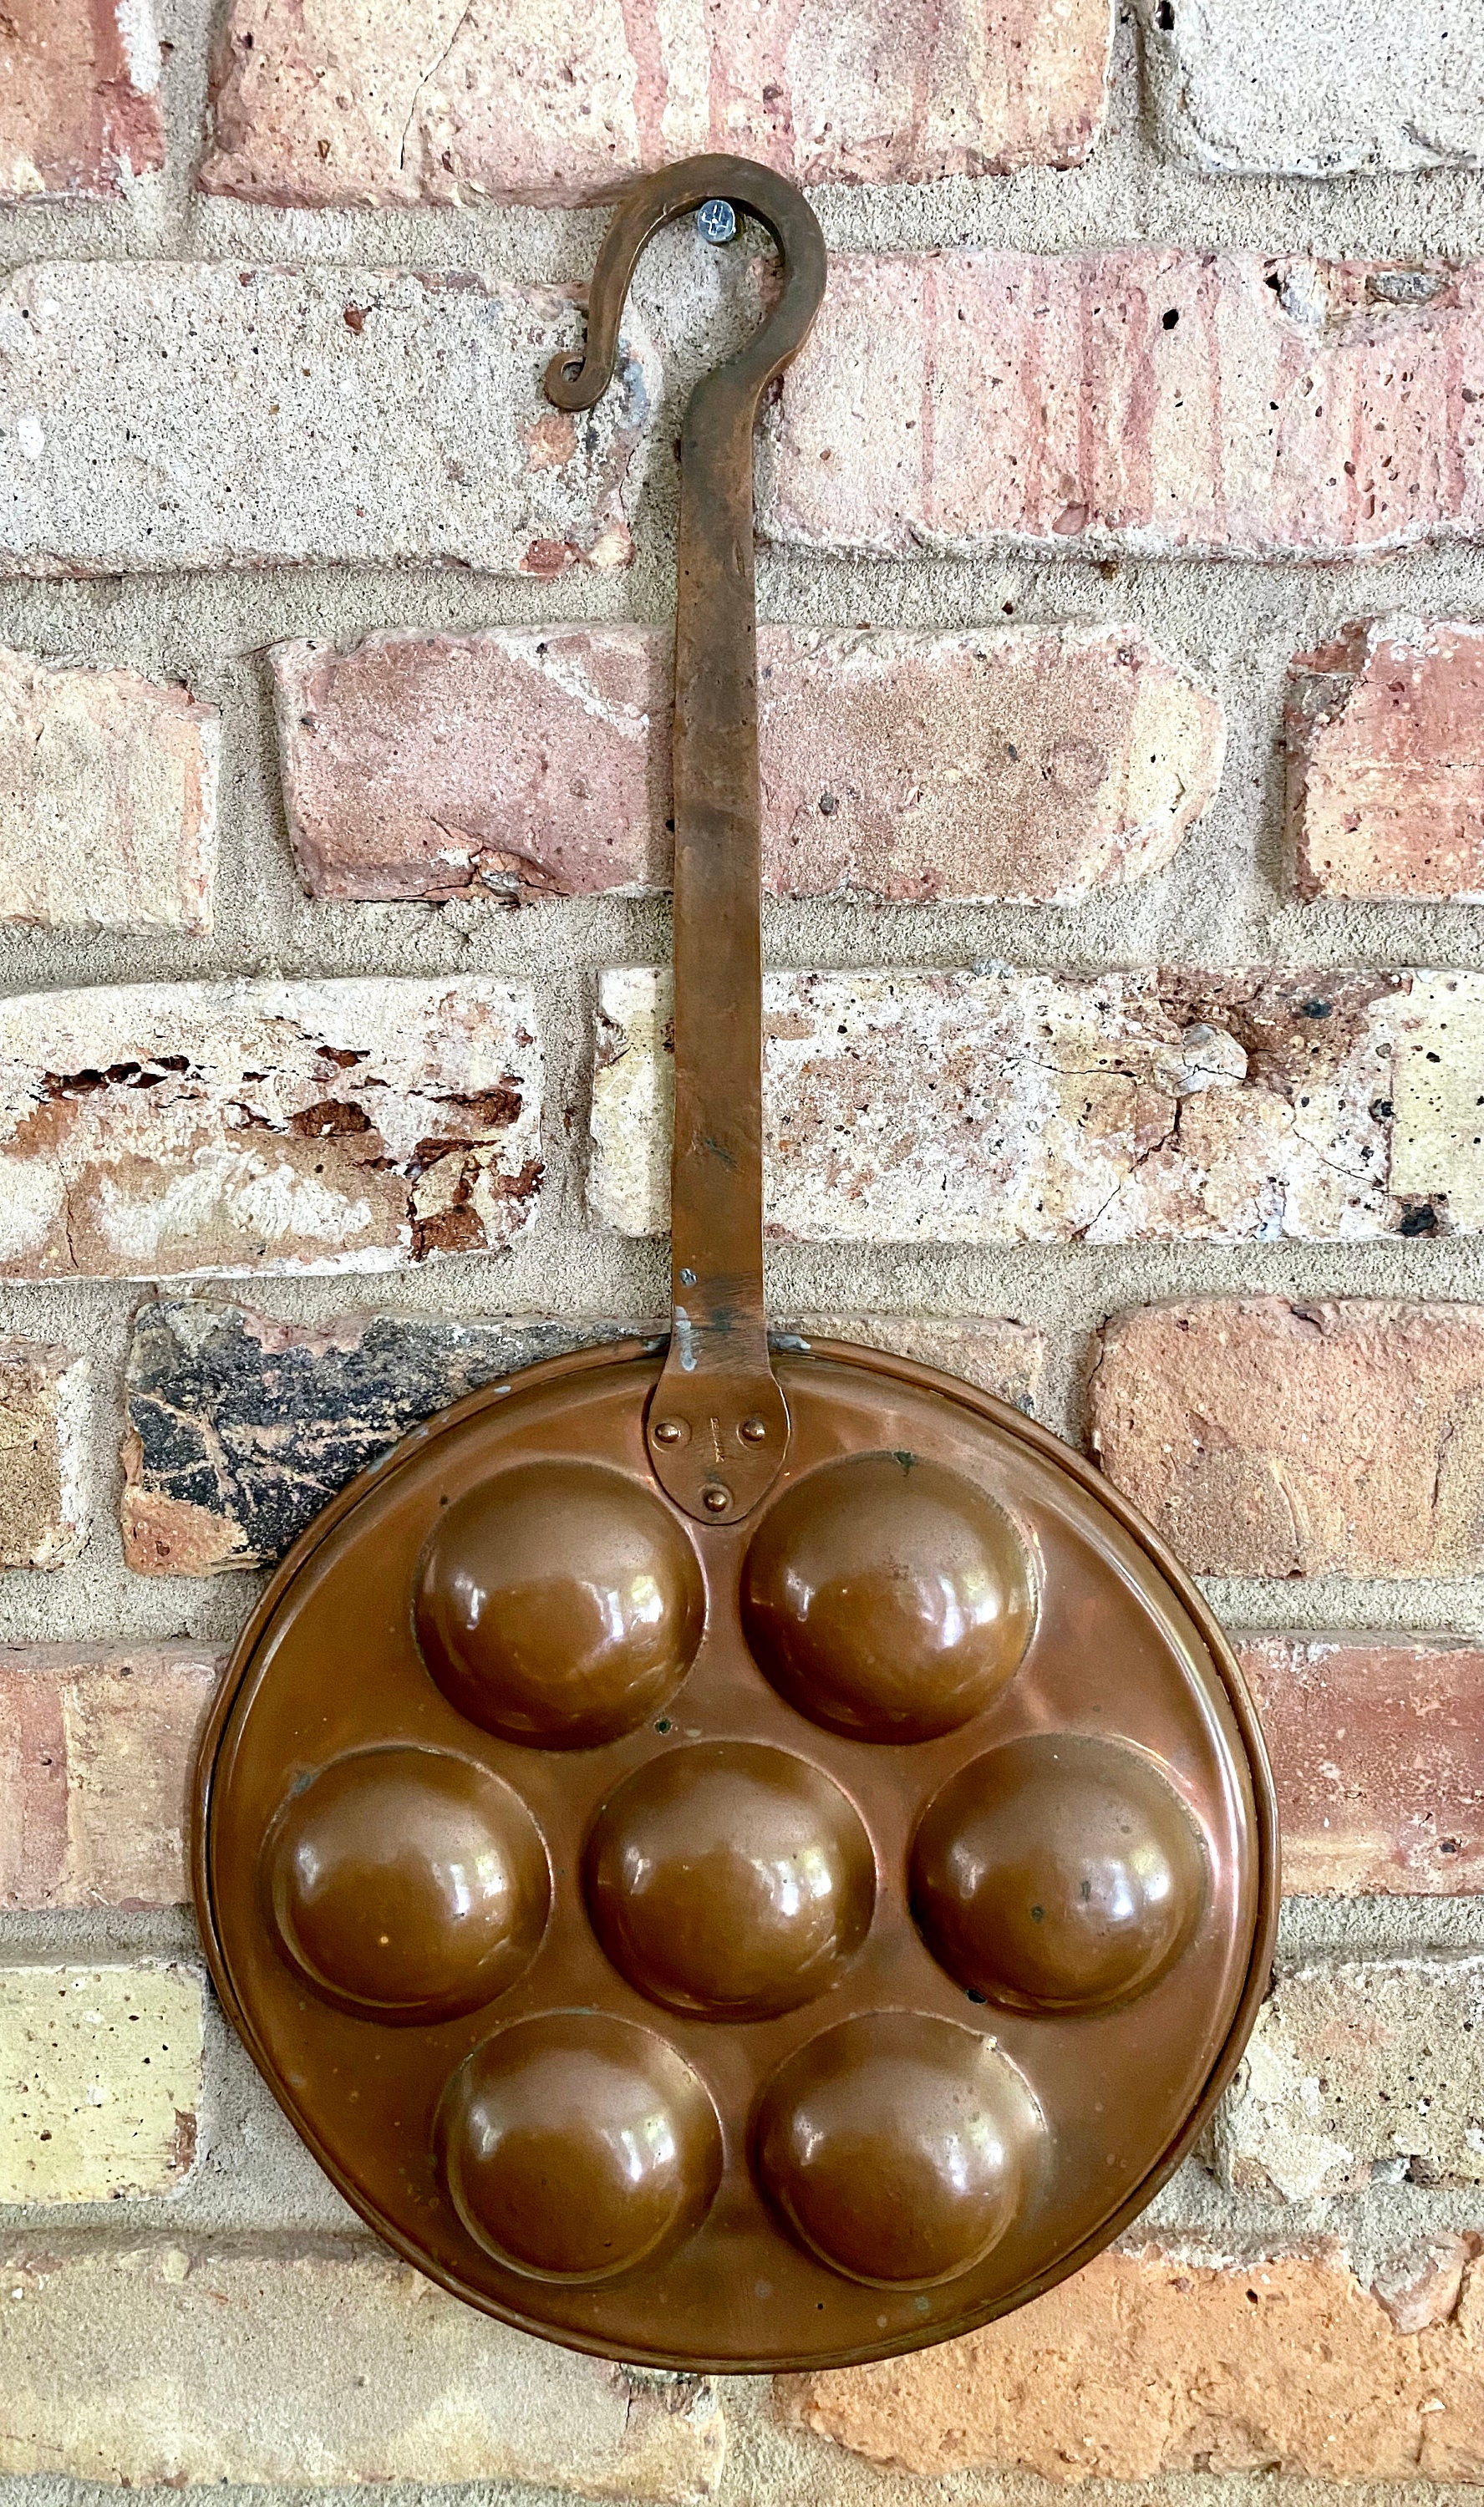 Vintage Copper Aebleskiver Pan æbleskiver Pastry Pan Large Copper Cooking  Pan With Hook Handle Copper Kitchen Decor Made in Denmark 